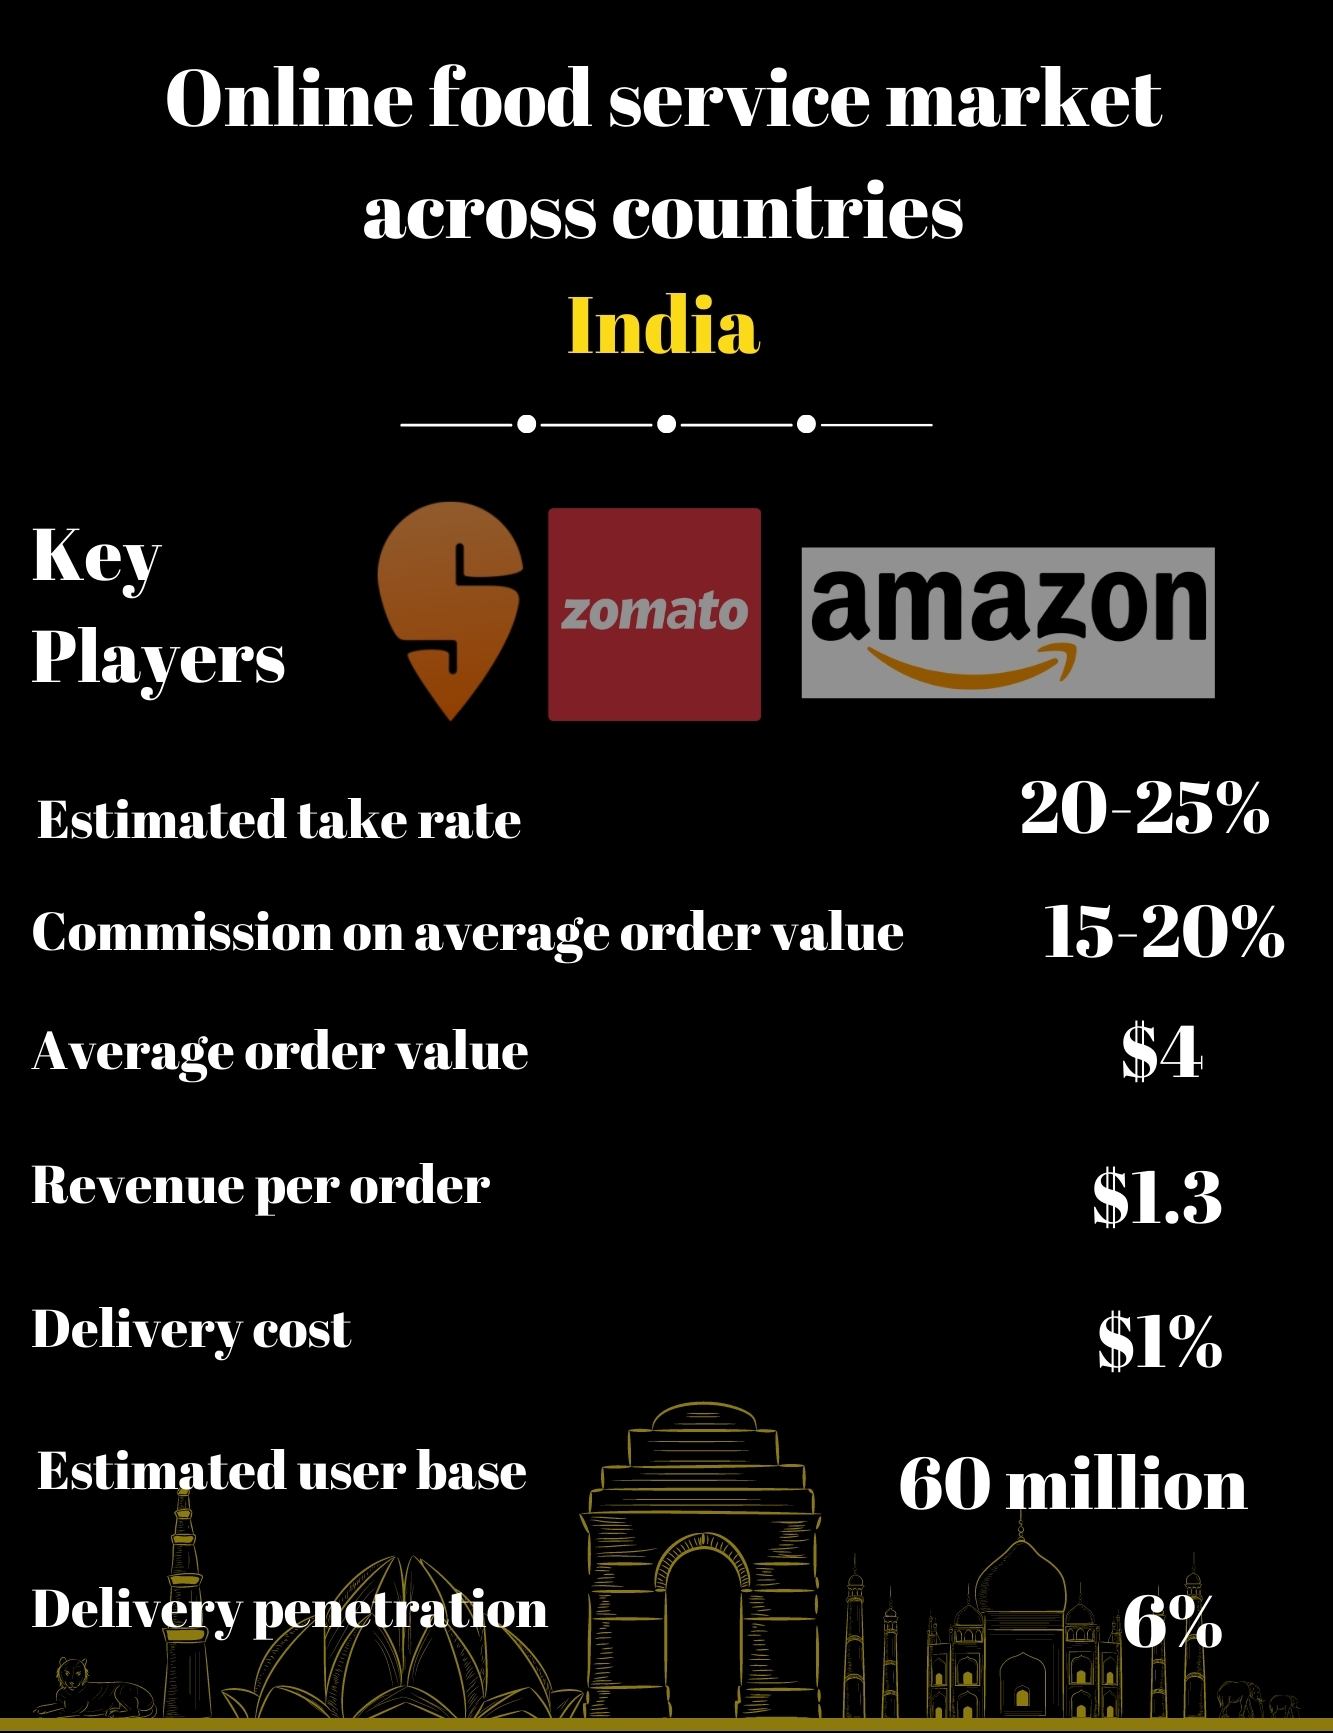 News by Numbers: 42 percent revenue of online food delivery business comes from only 8 Indian cities